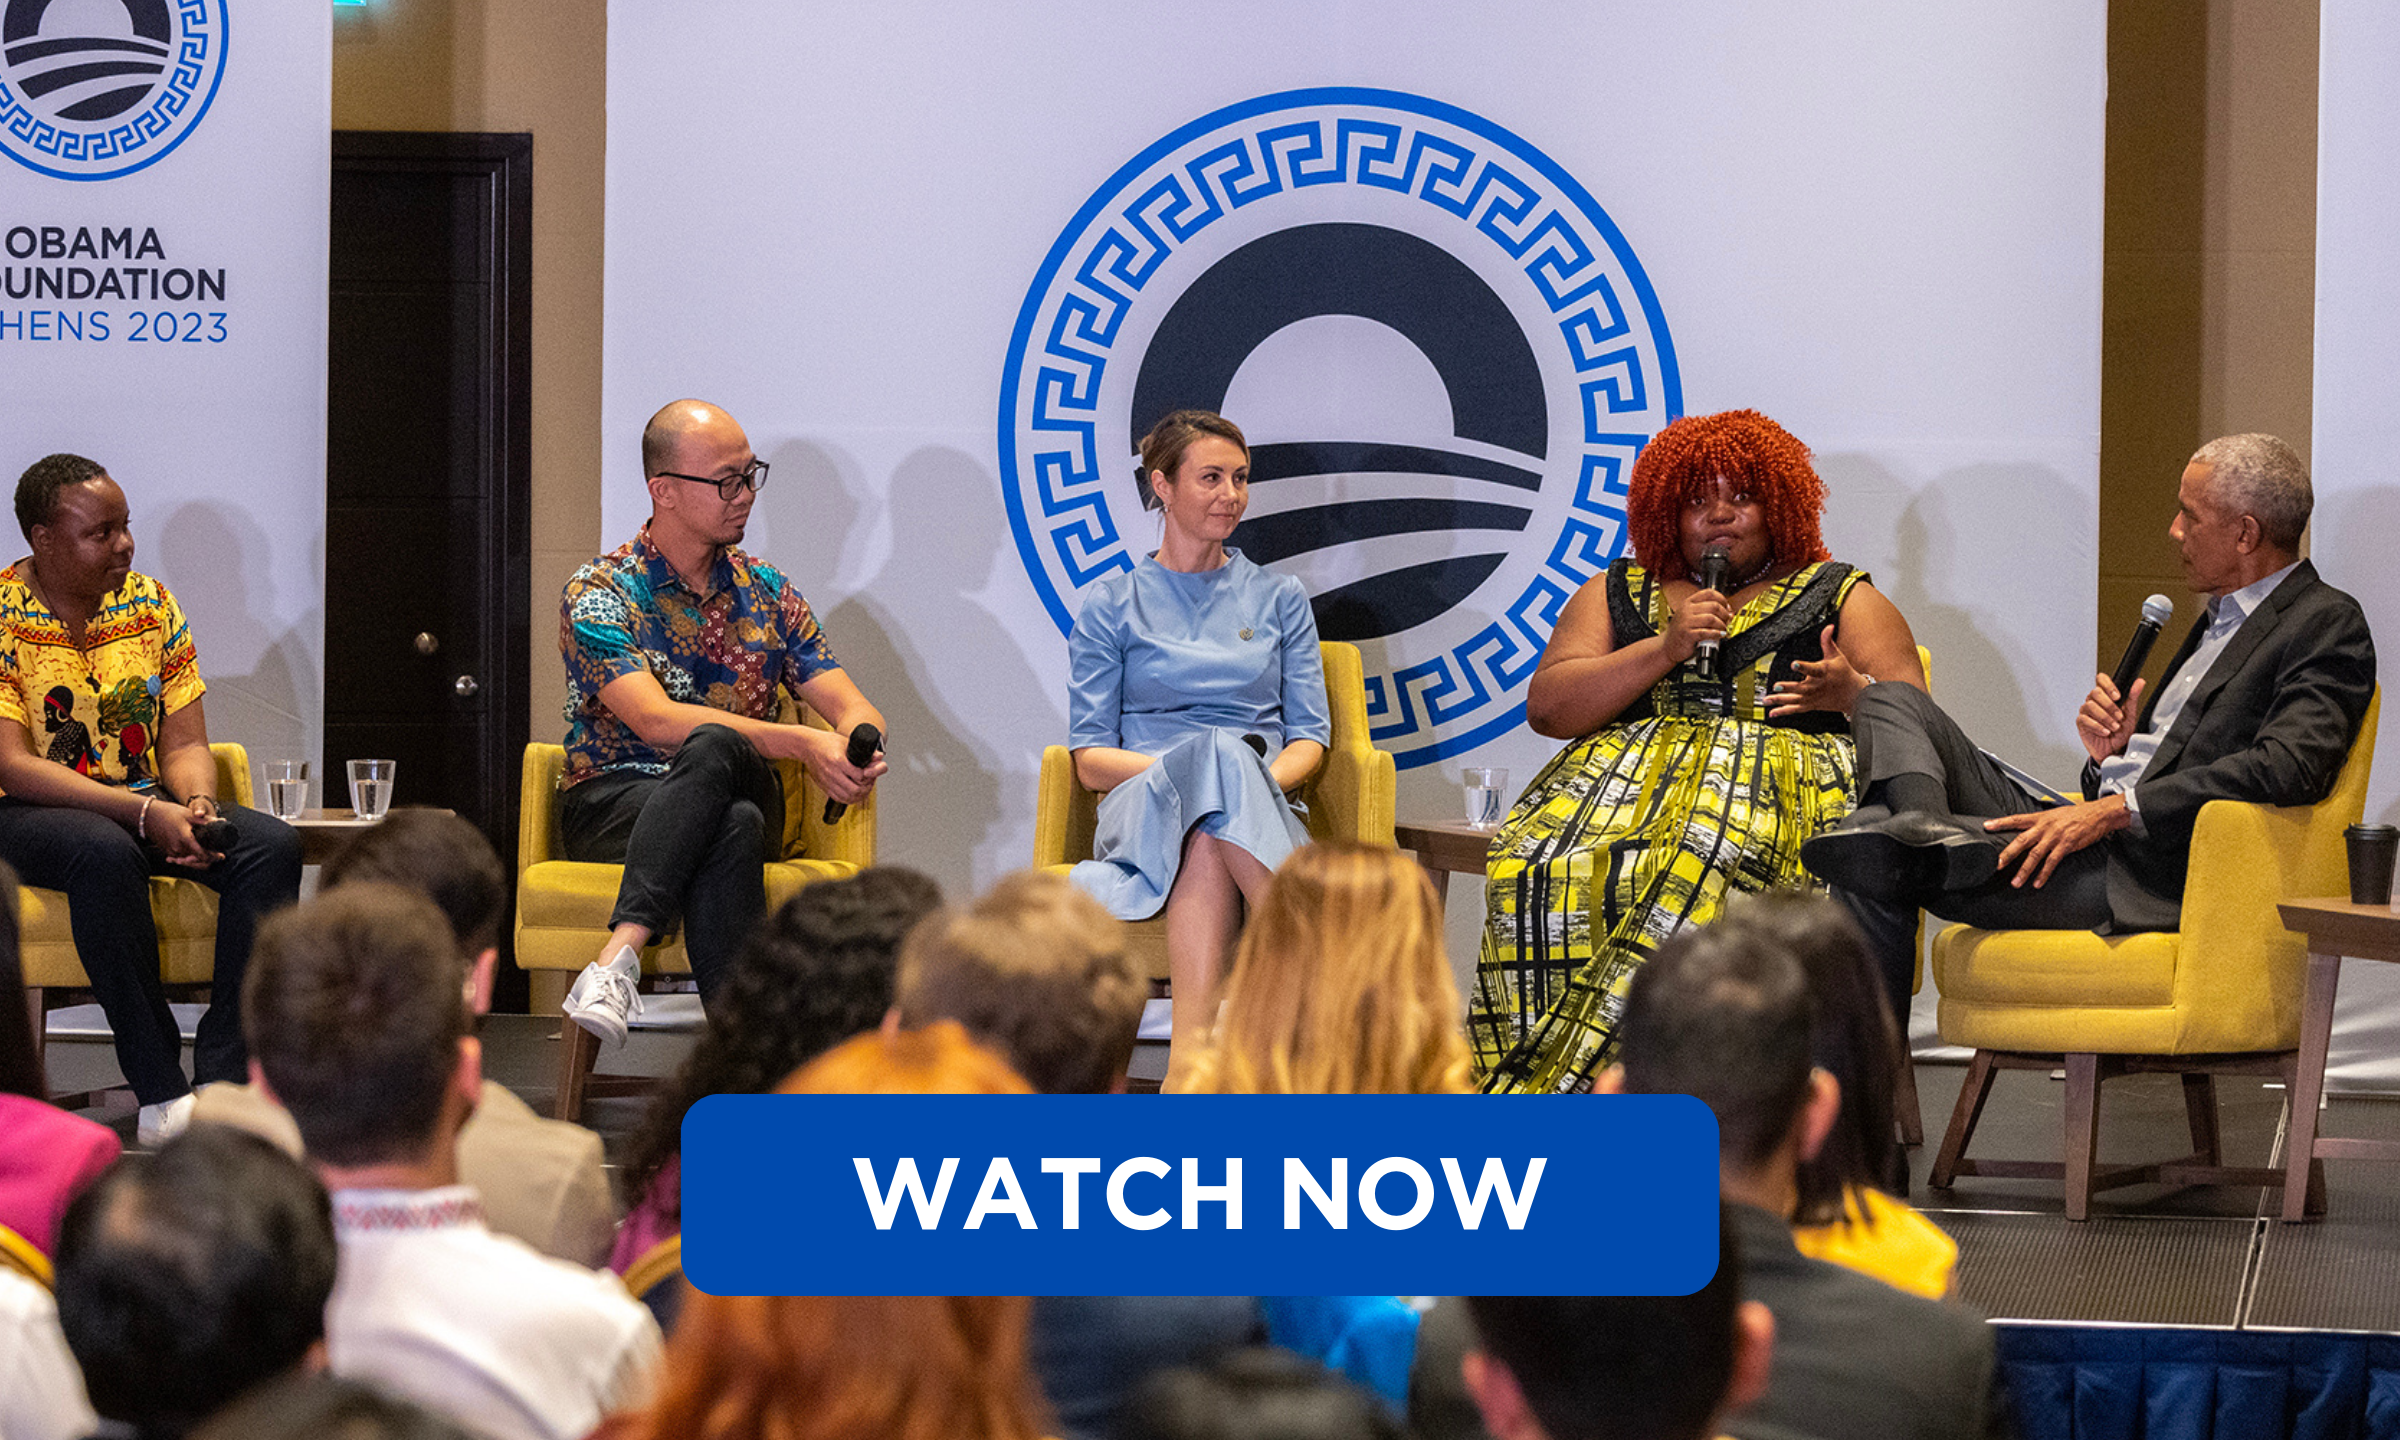 Four people with a range of skin tones and hair types, including President Obama on the far right, are seated in yellow armchairs and looking toward the woman seated next to President Obama, who is holding a microphone and speaking. 